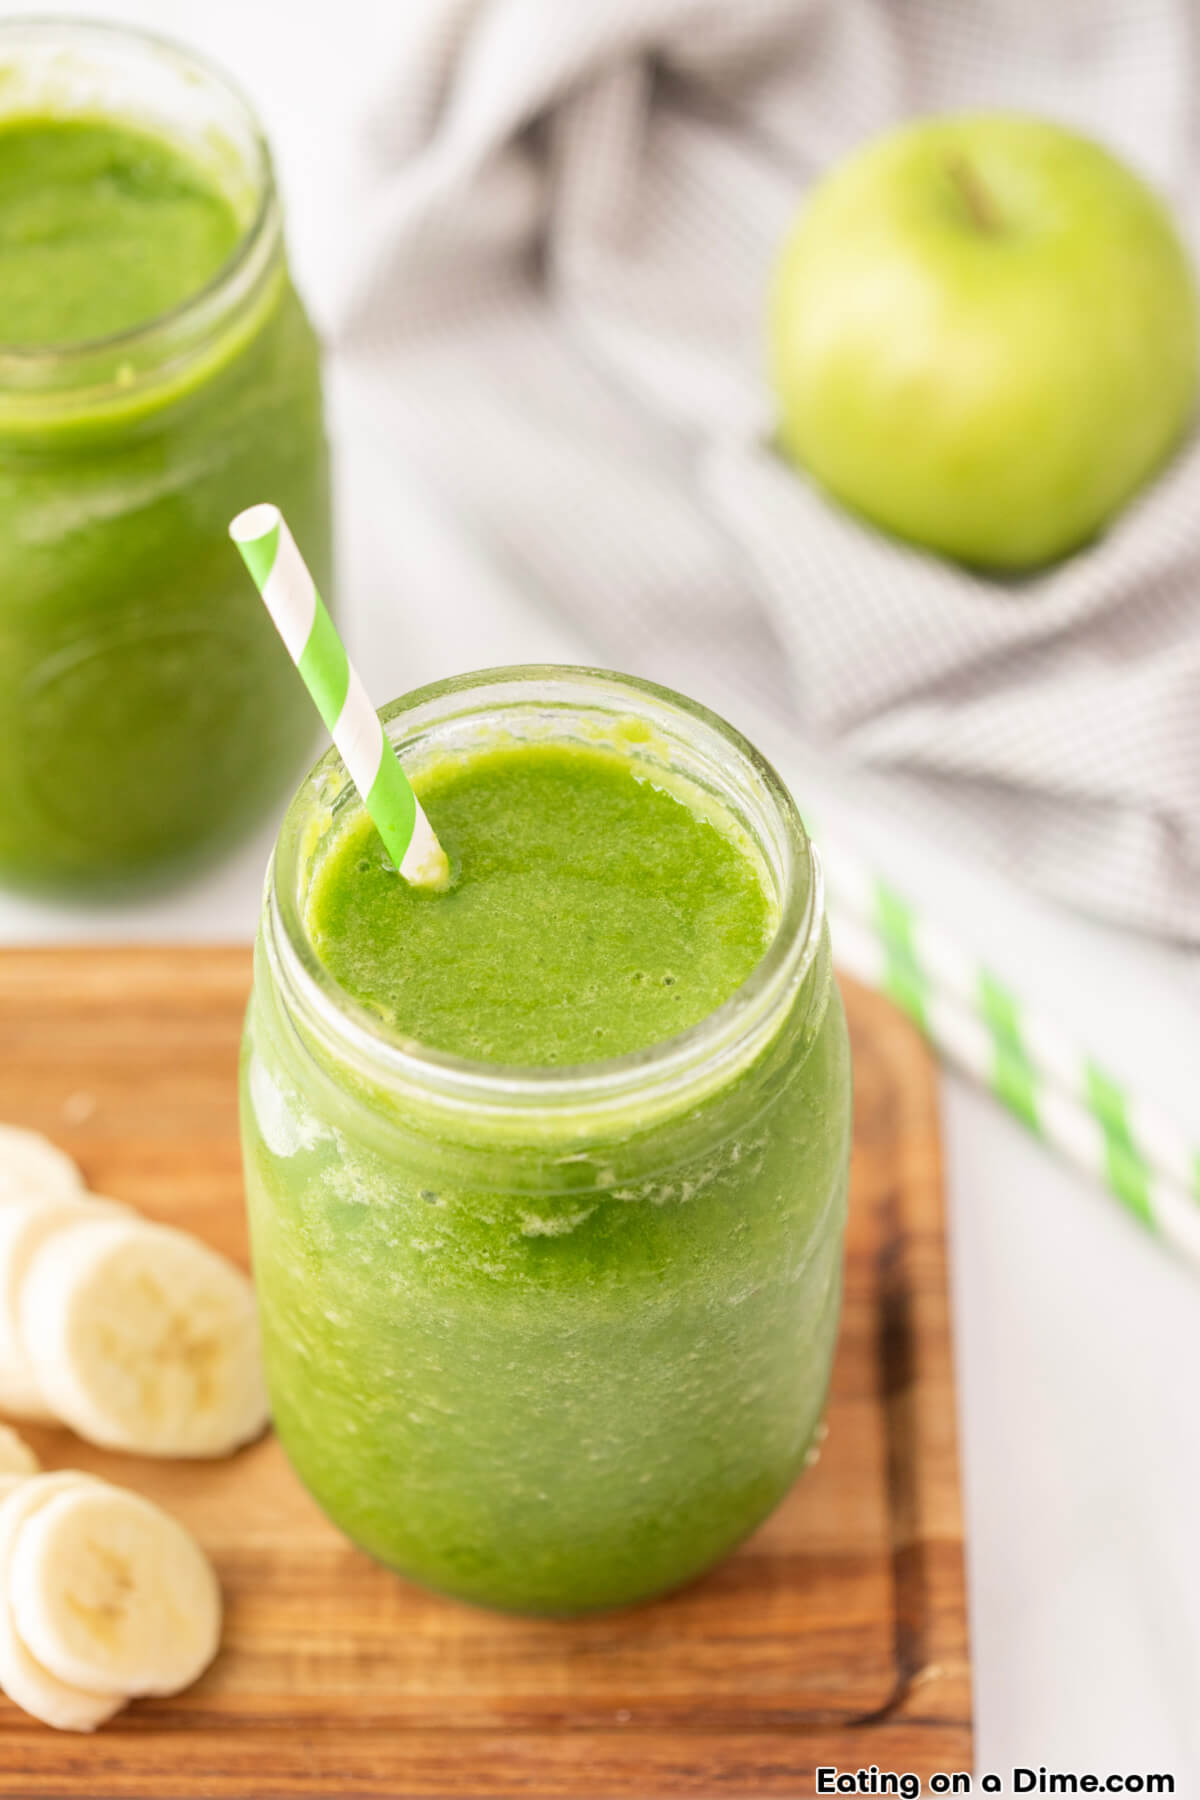 Green Apple Spinach Smoothie- Spirited and Then Some